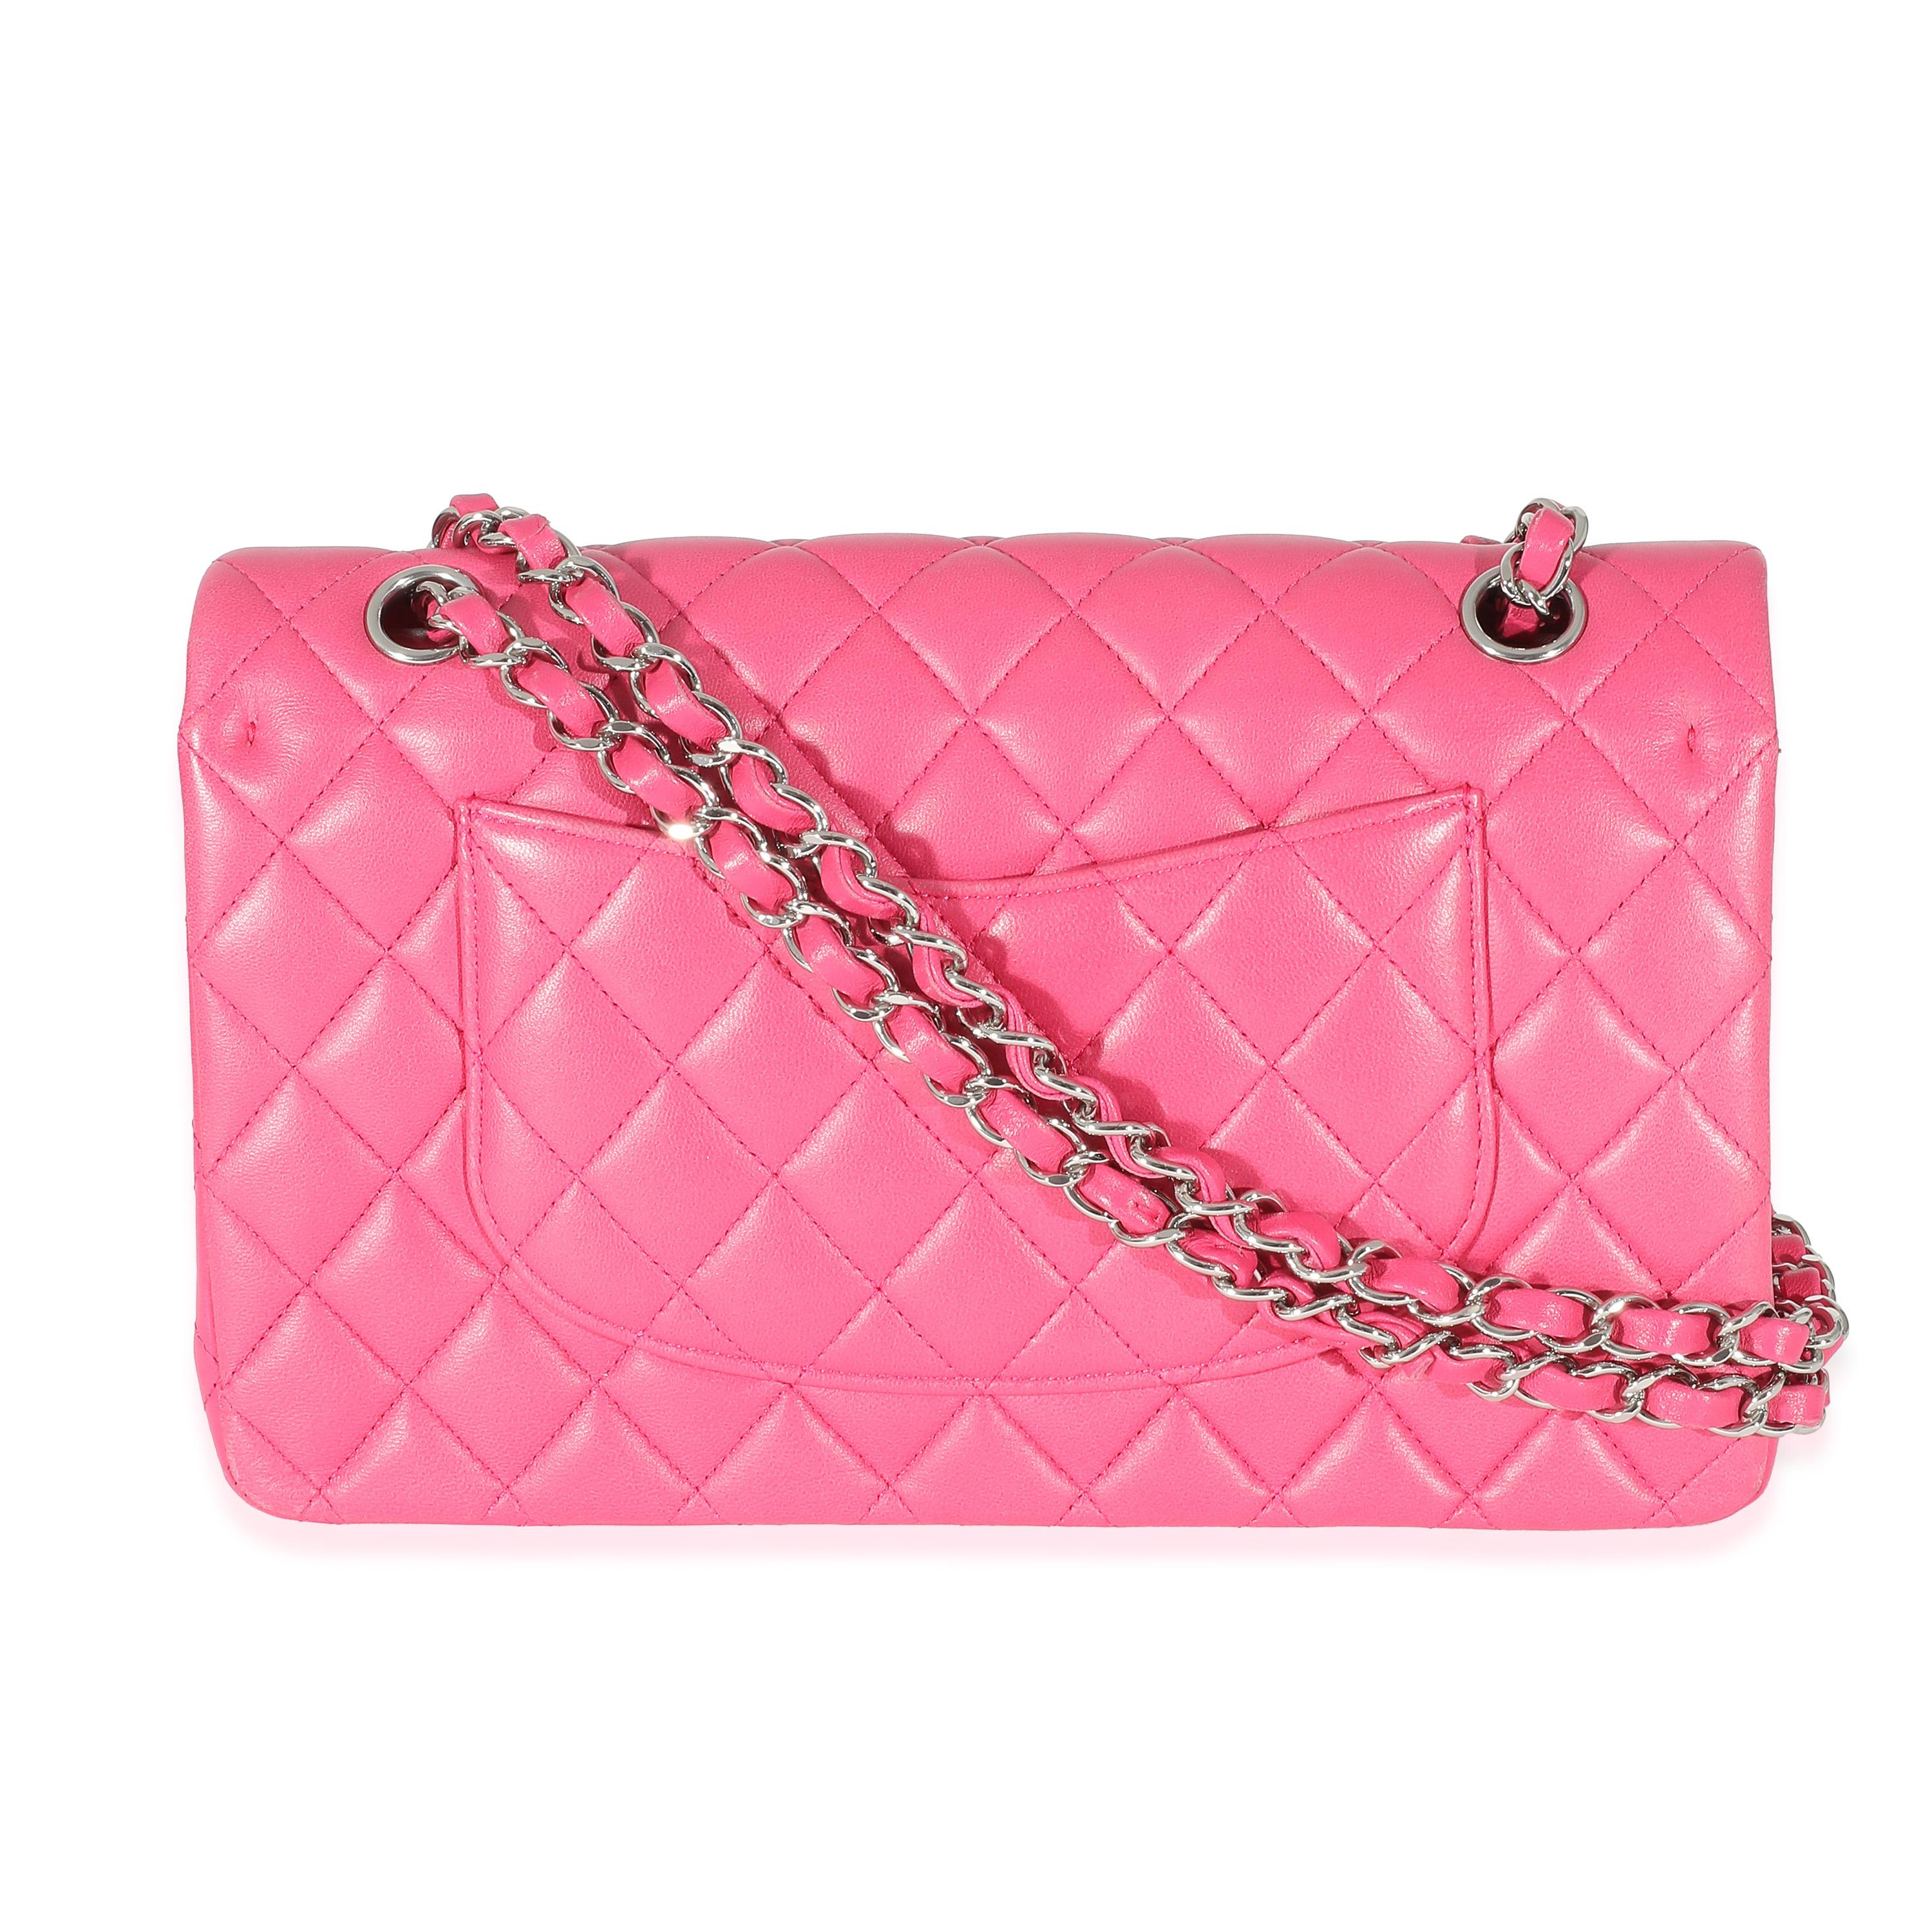 Chanel Pink Quilted Lambskin Medium Classic Double Flap Bag For Sale 3